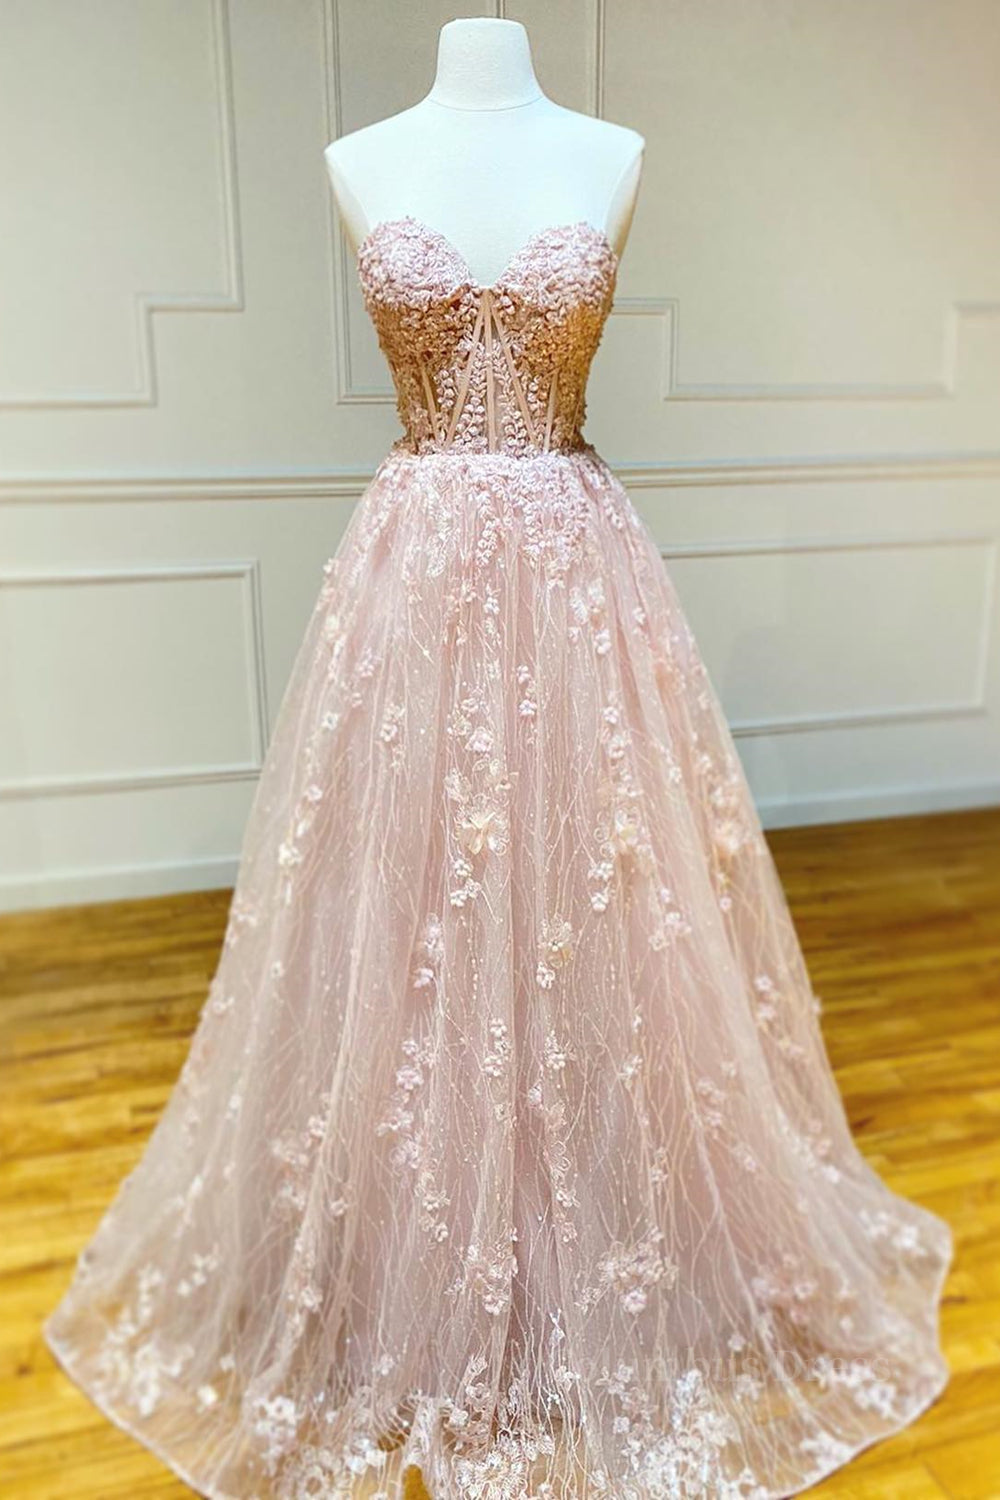 Strapless Sweetheart Neck Pink Lace Long Corset Prom Dress, Pink Lace Corset Formal Graduation Evening Dress outfit, Evening Dress Sale